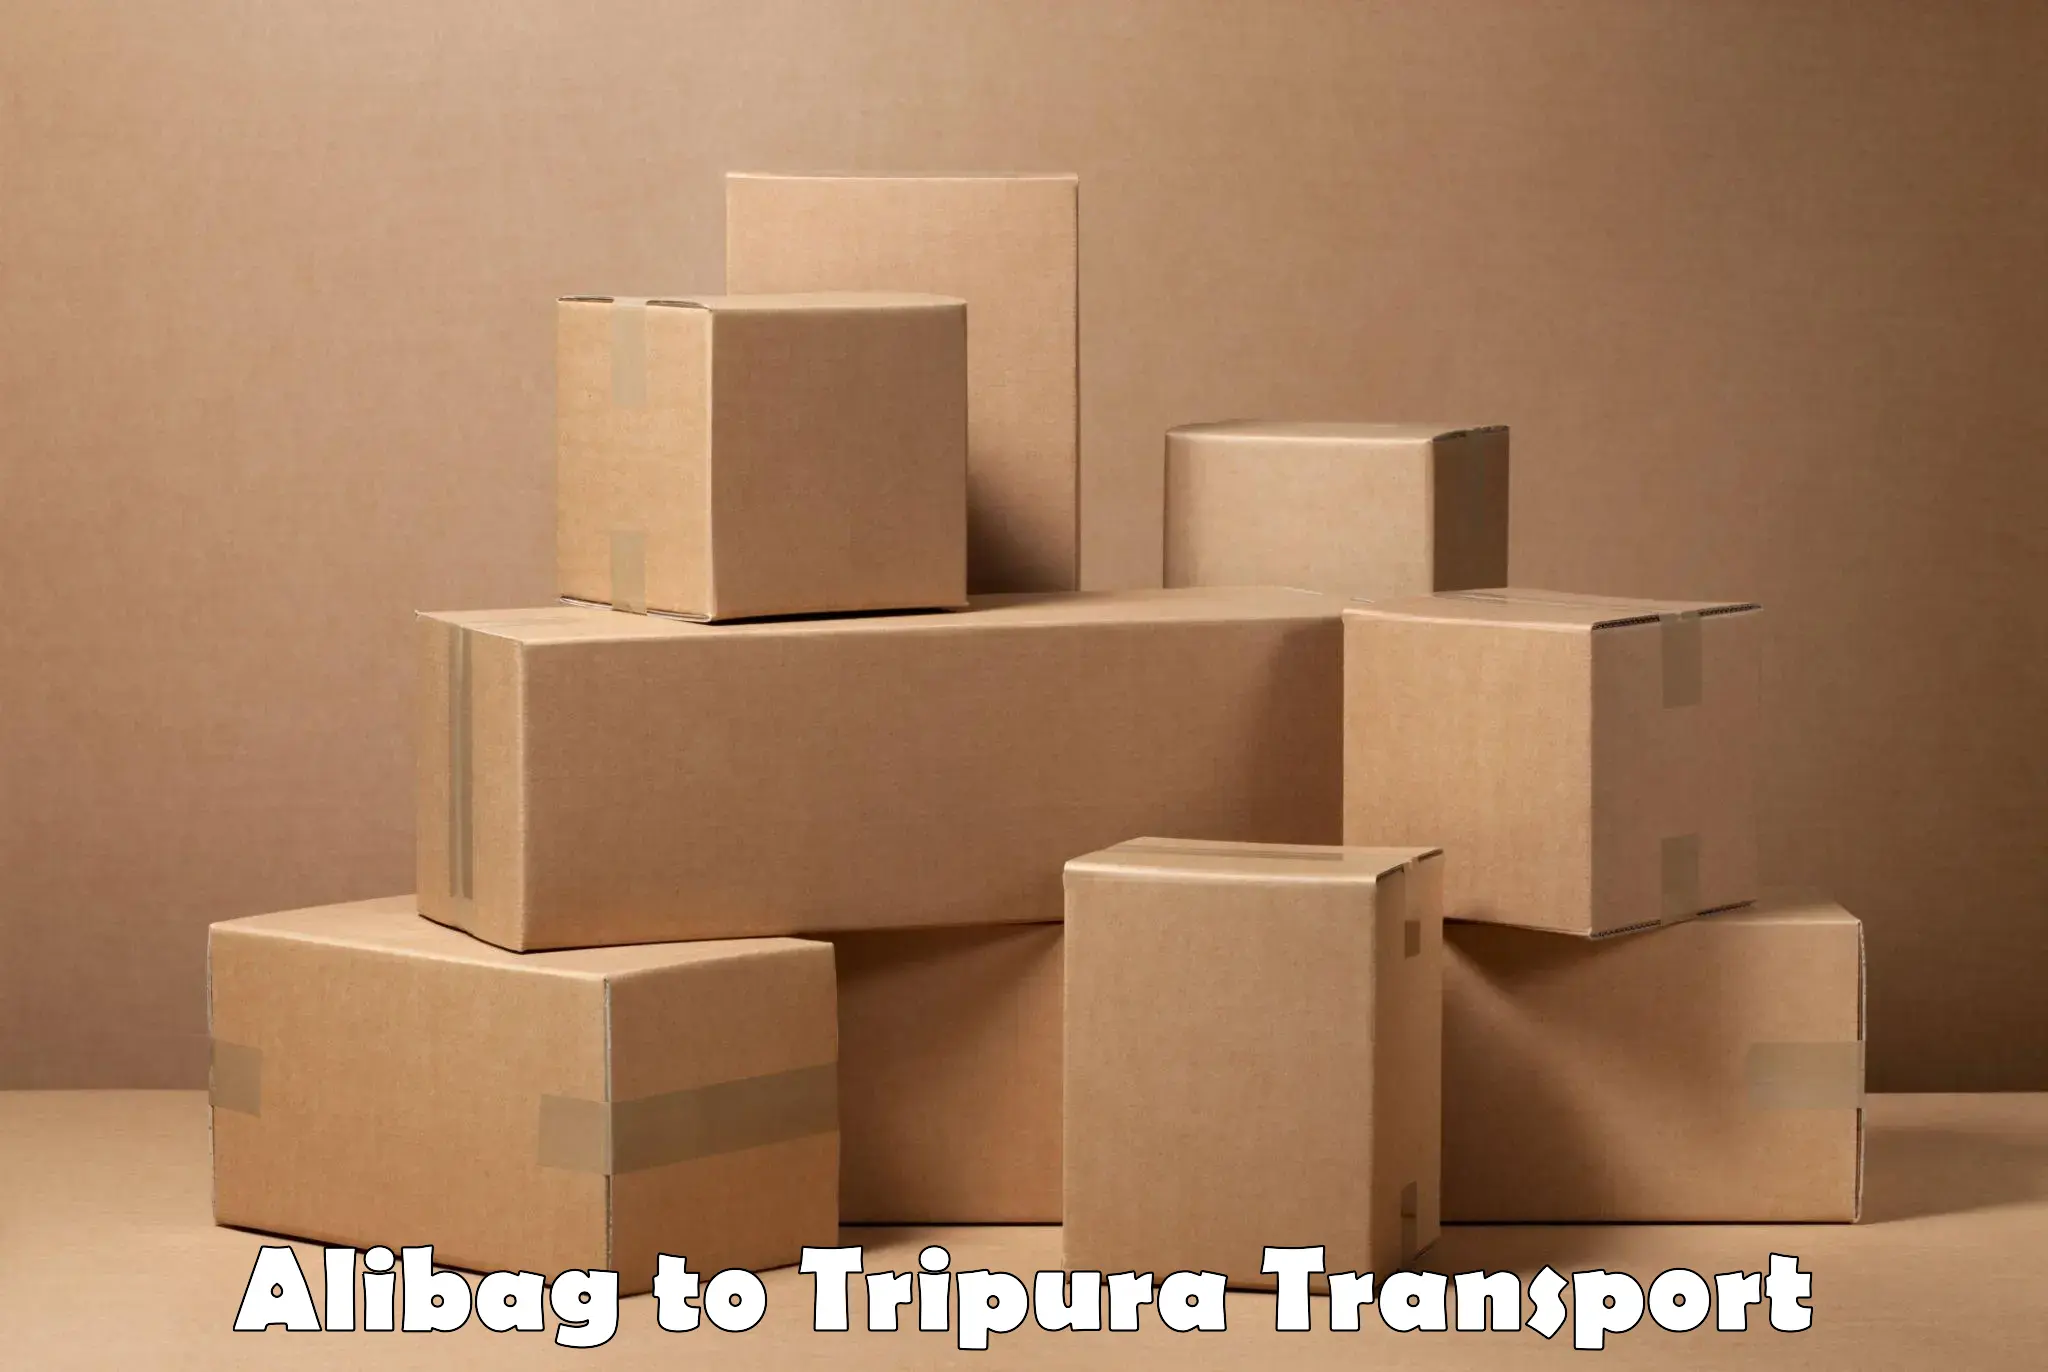 Daily transport service in Alibag to Udaipur Tripura